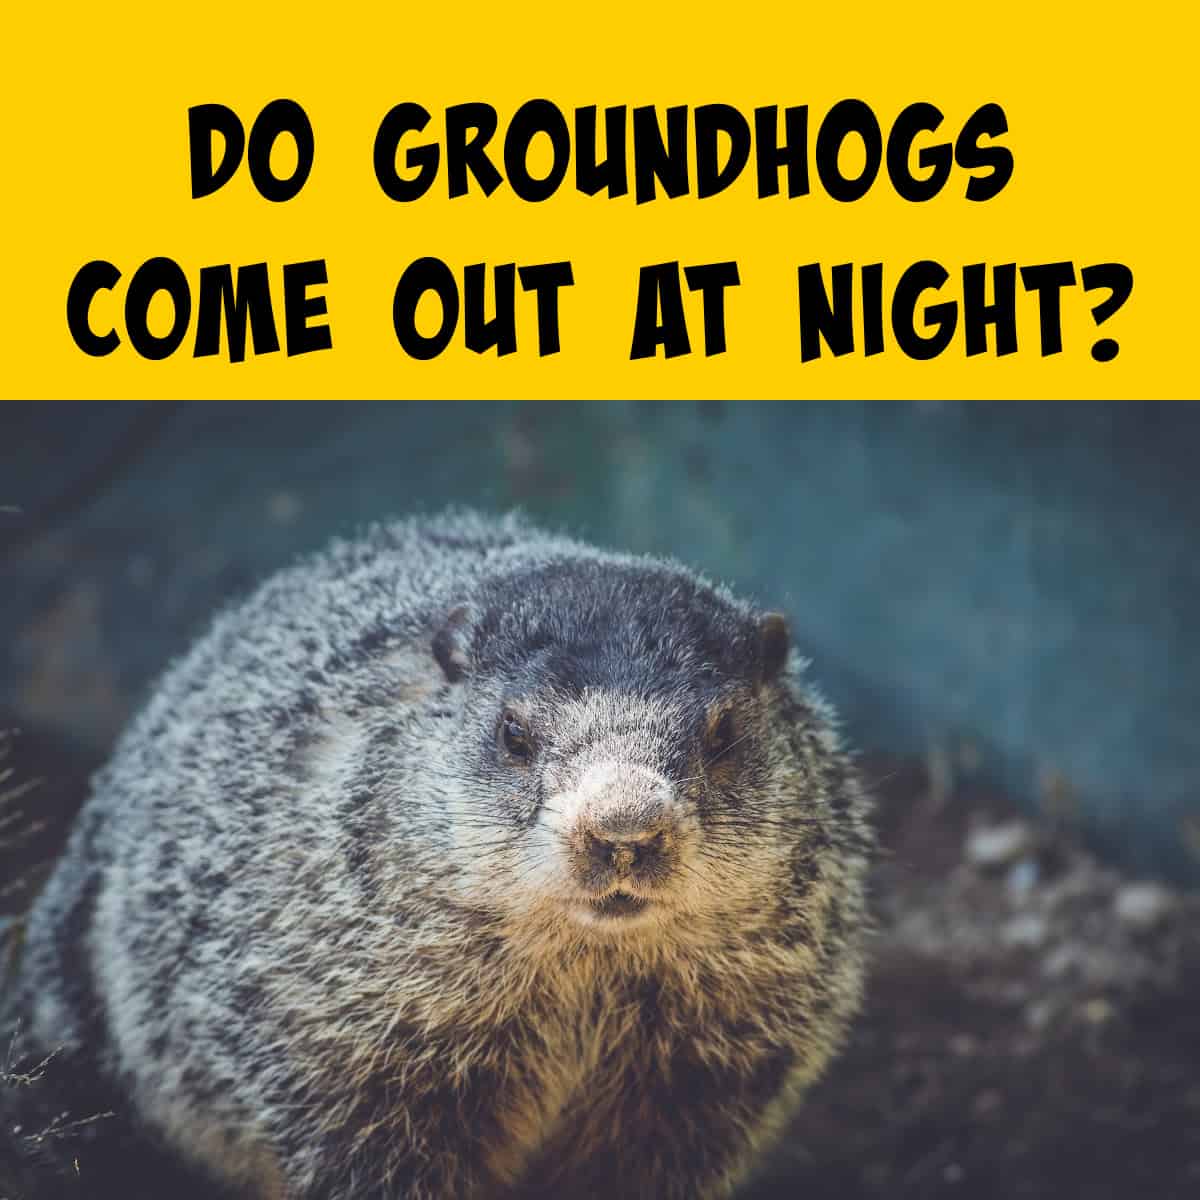 Picture of a groundhog at Dusk